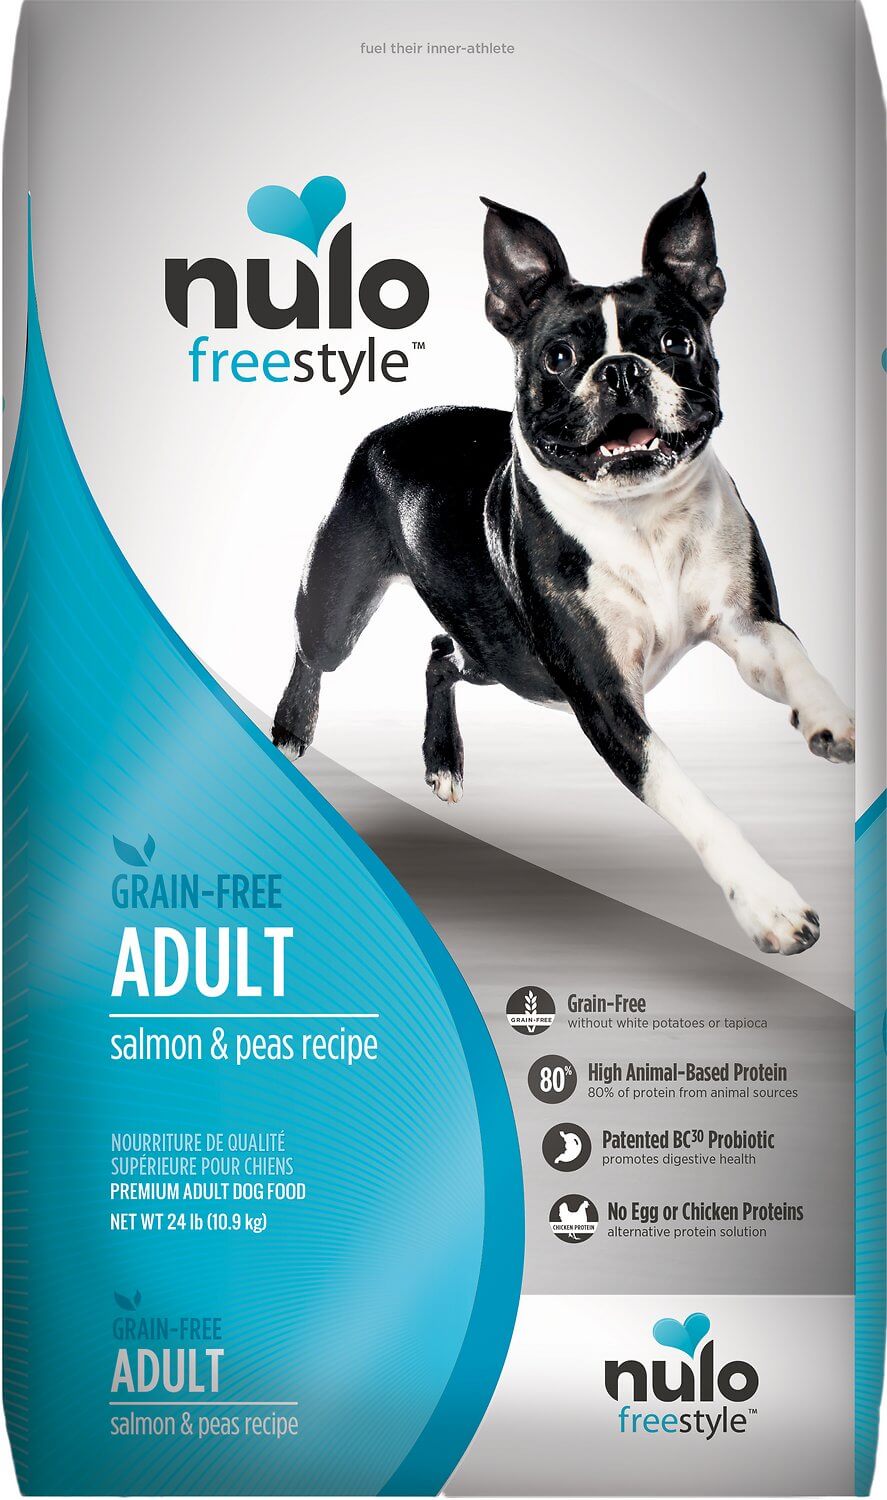 Nulo Freestyle Grain-Free Adult - Best Dog Food for French Bulldogs